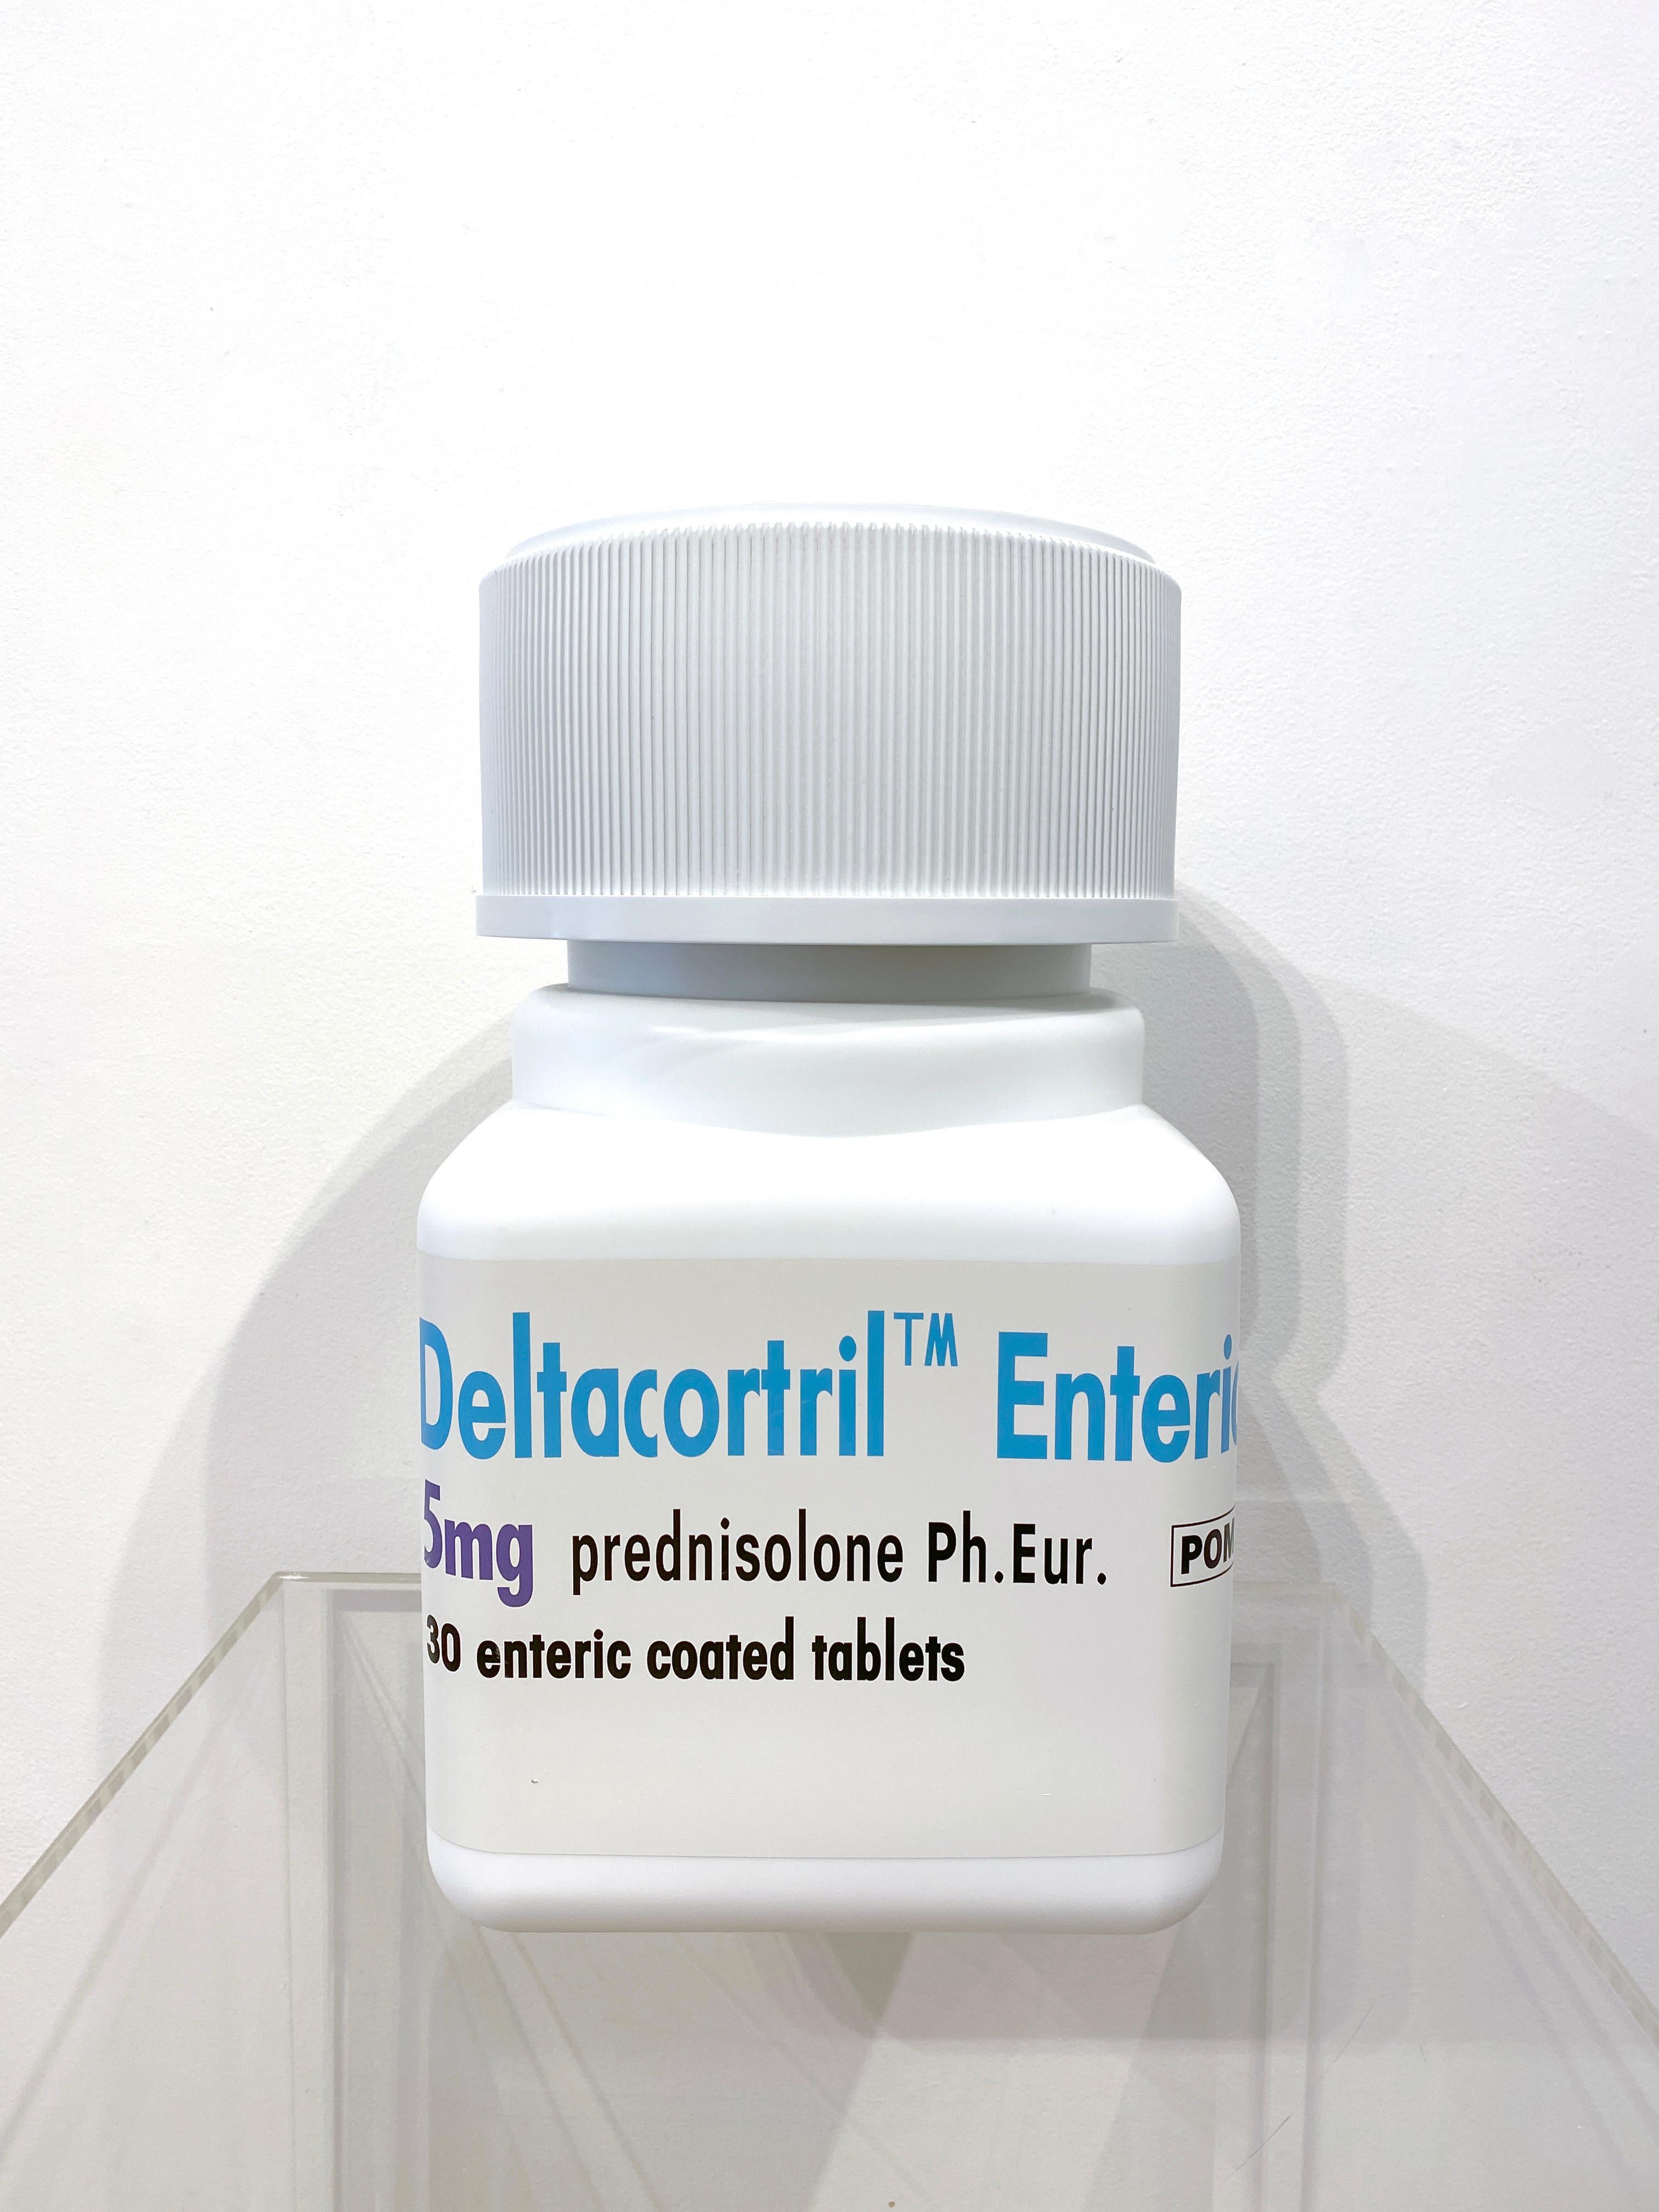 Deltacortril Enteric 5mg 30 enteric coated tablets 